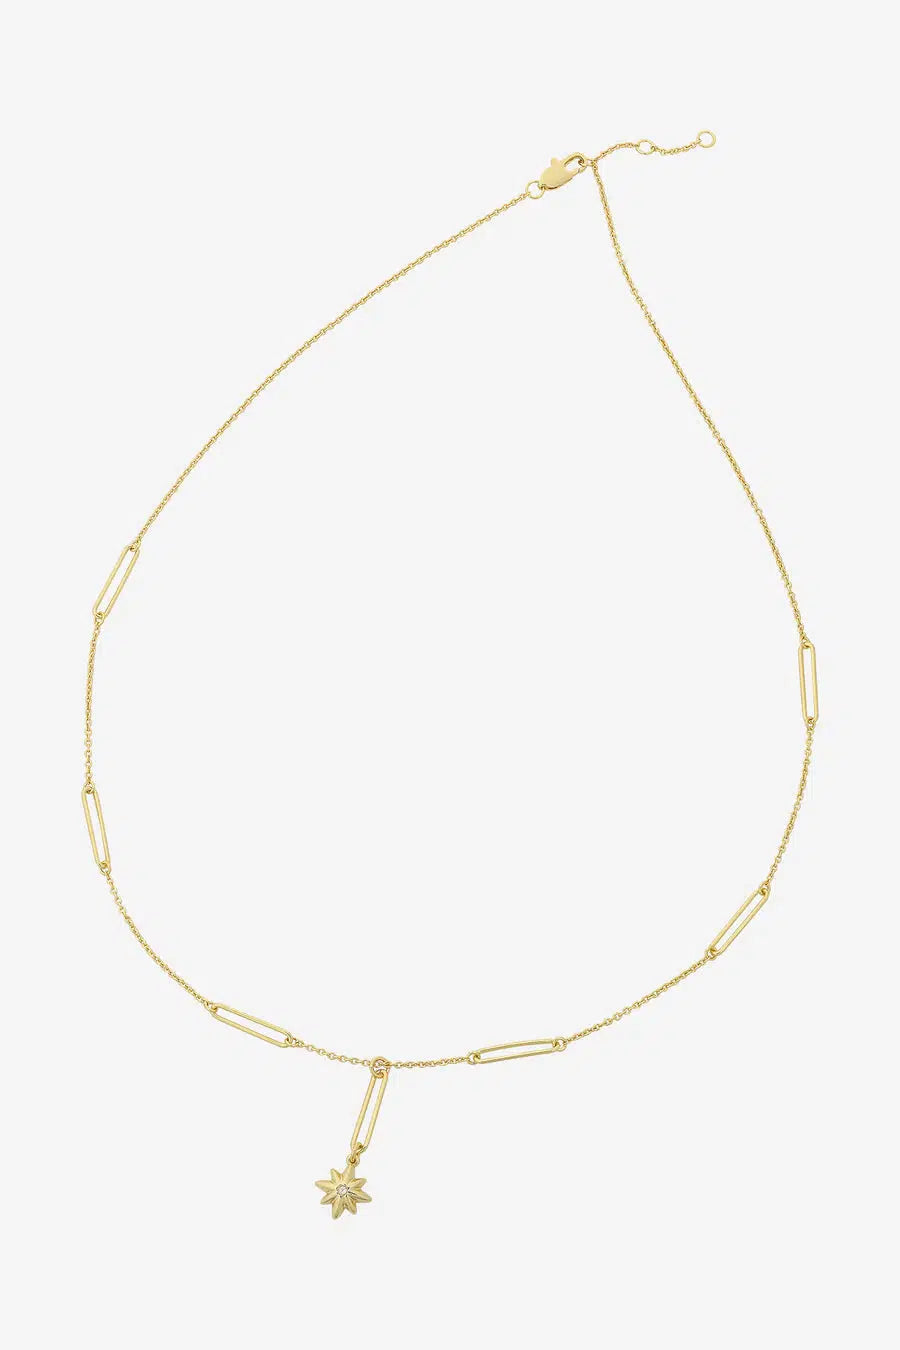 Issy Gold Necklace-Lima & Co-Lima & Co